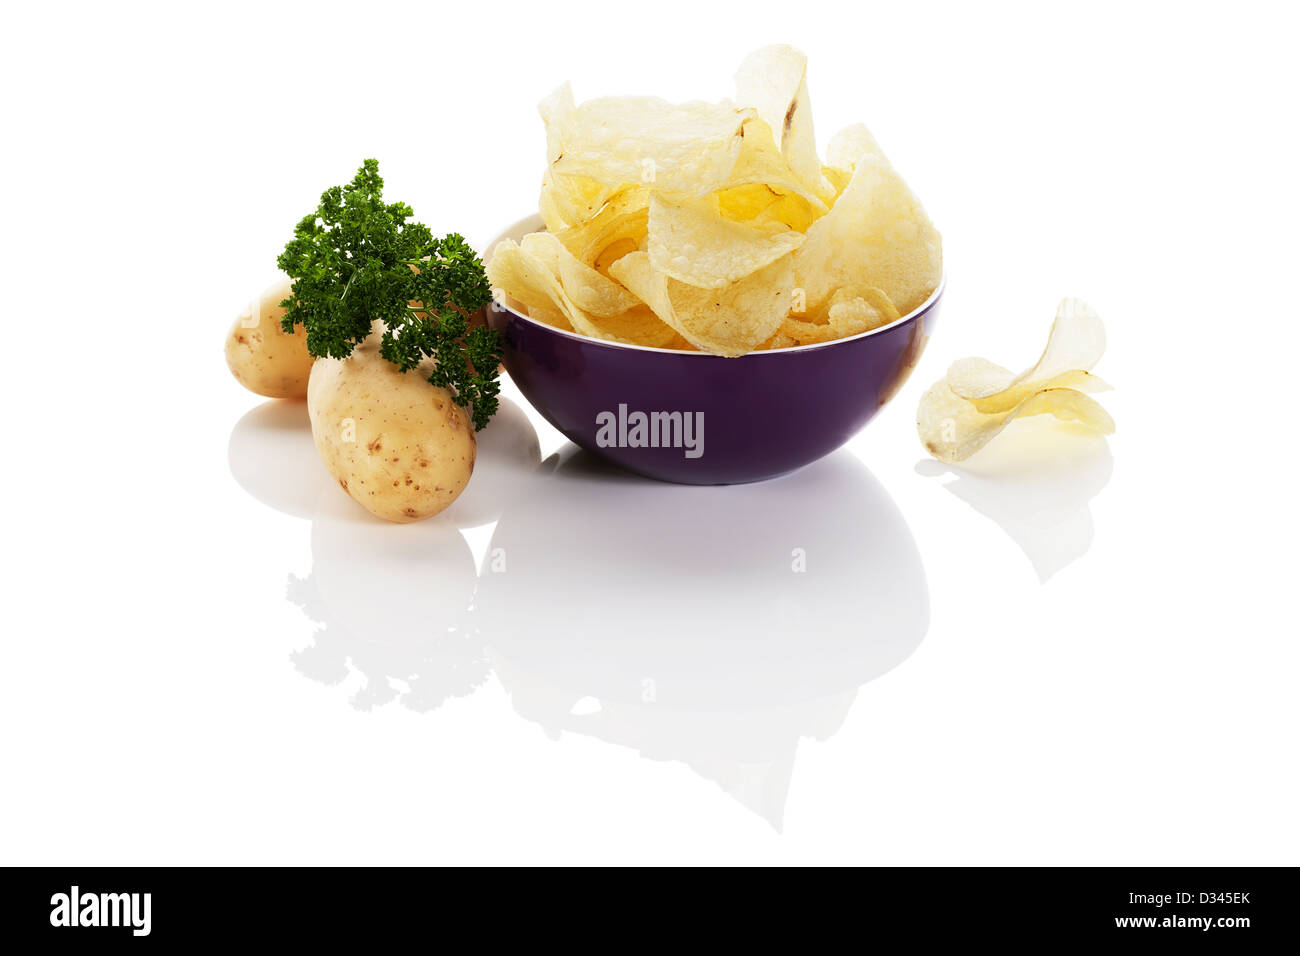 potato chips in a purple small bowl with potatoes aside on white background Stock Photo